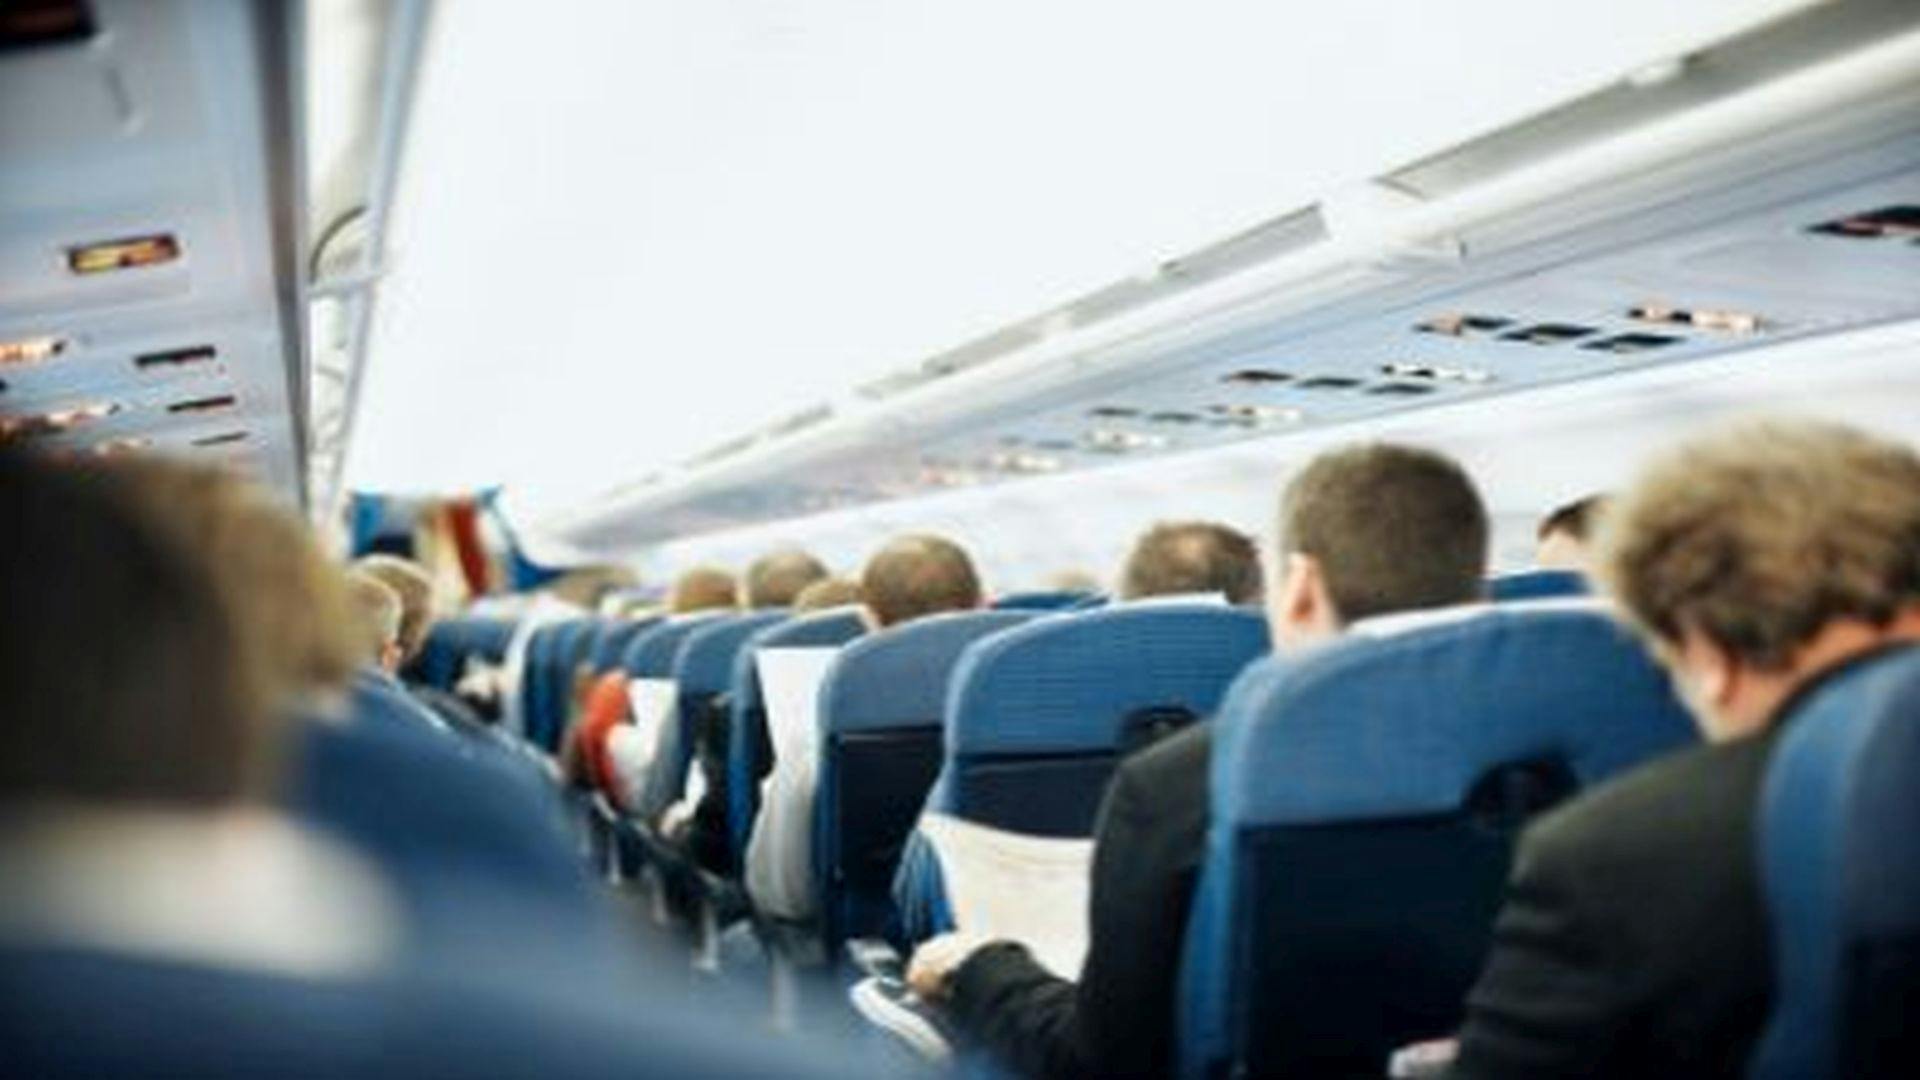 New Boarding Procedures, Smaller Cabin Size May Limit Infection on Planes